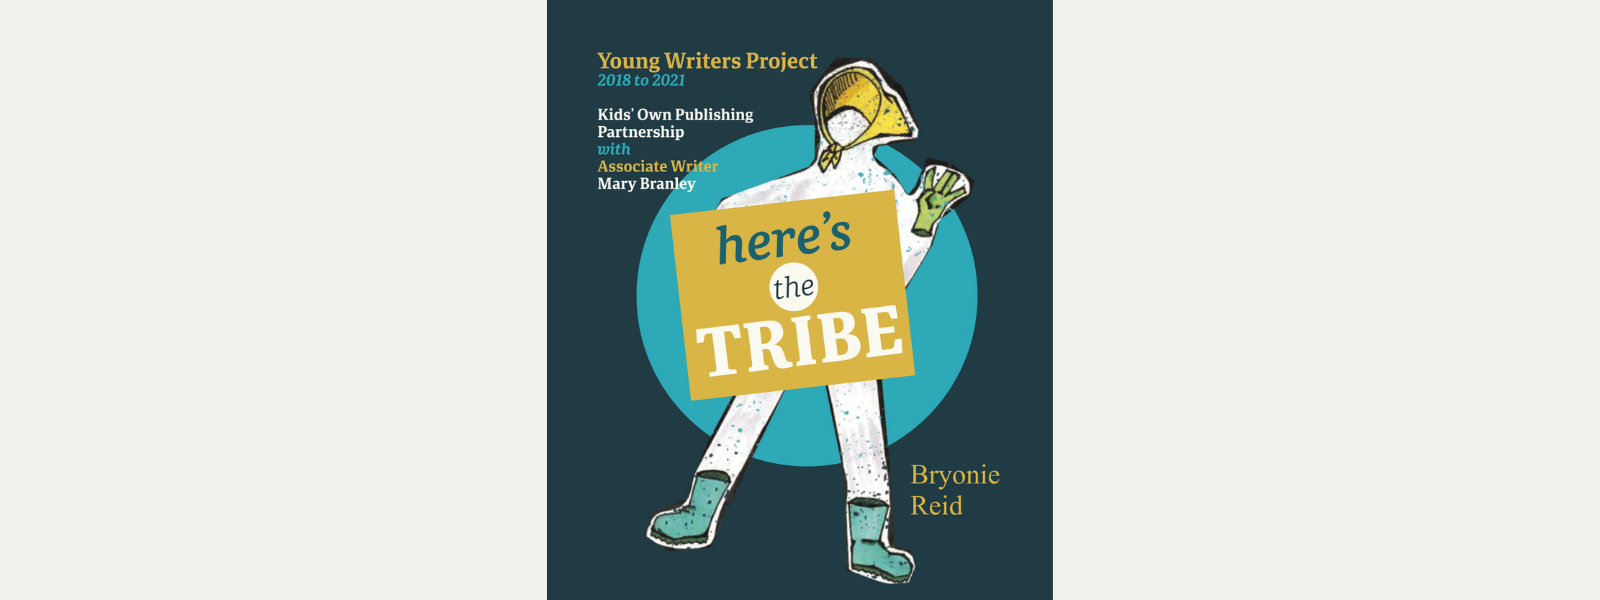 Here’s The Tribe: An evaluation of our Young Writers Project